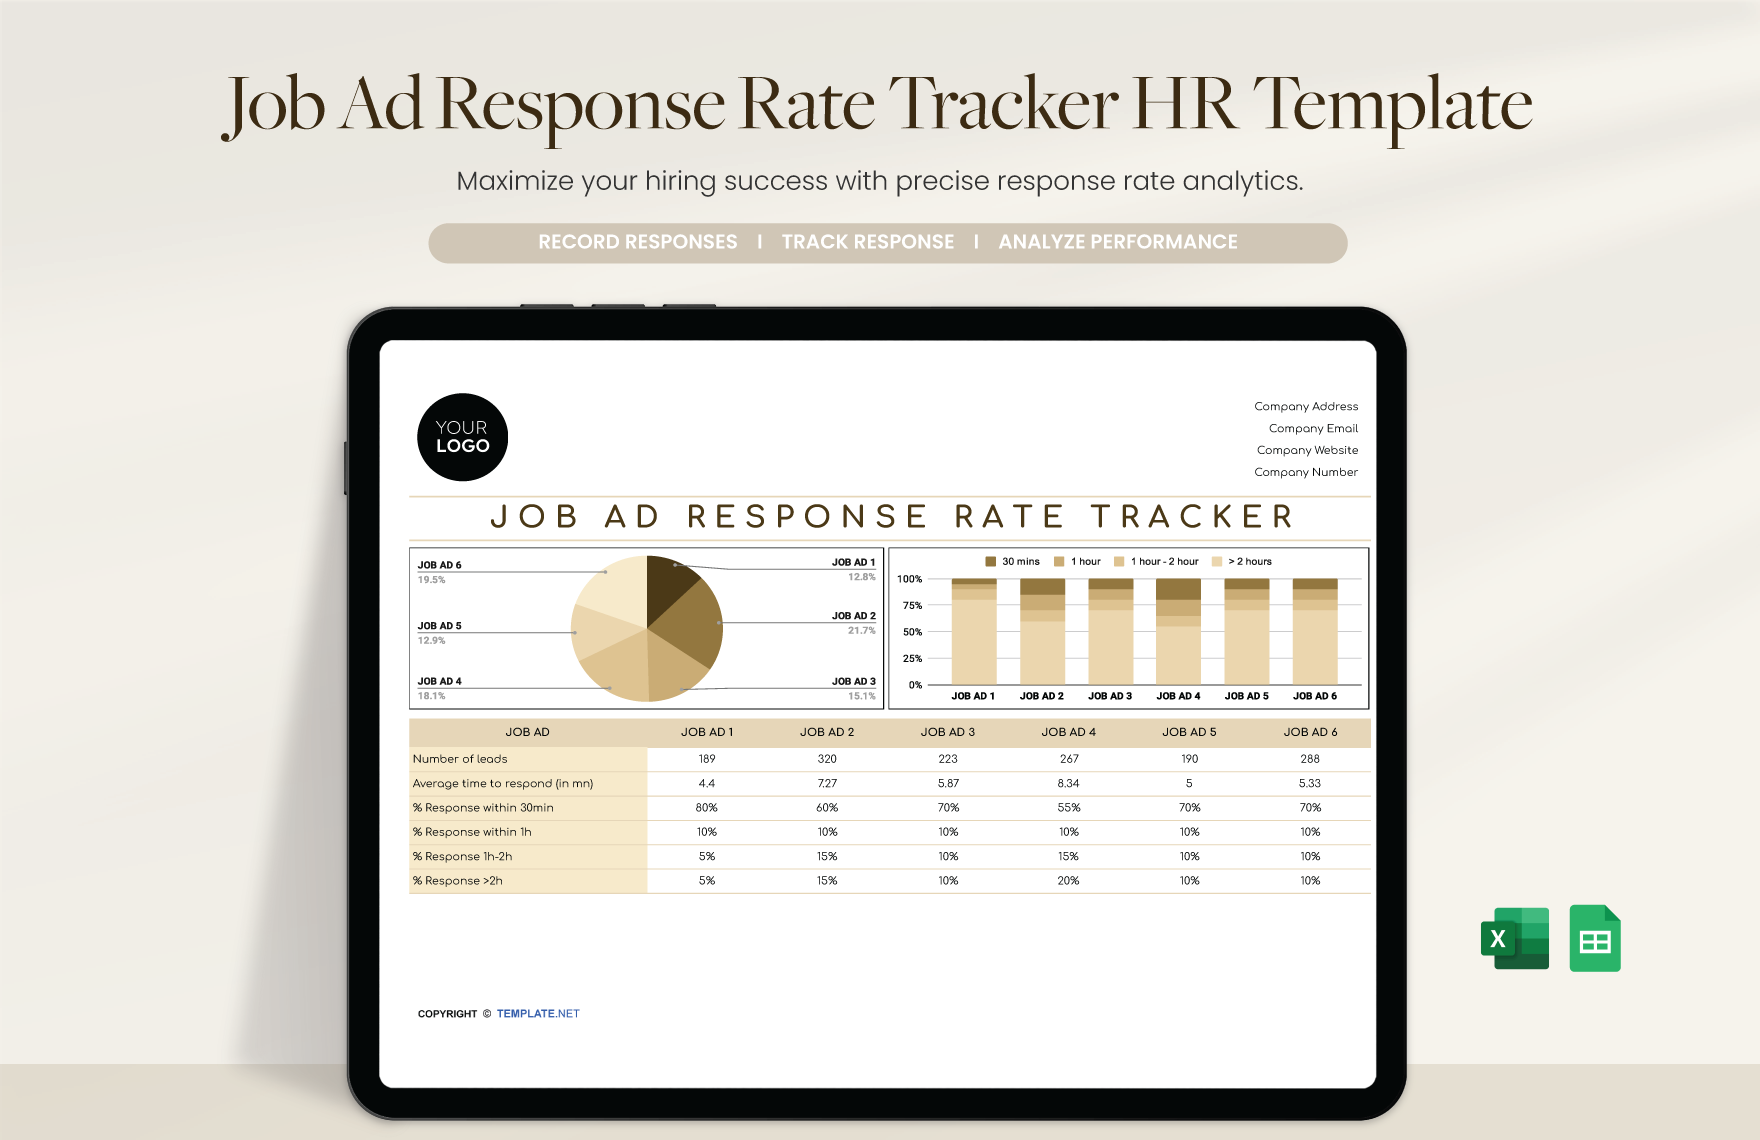 Free Job Ad Response Rate Tracker HR Template